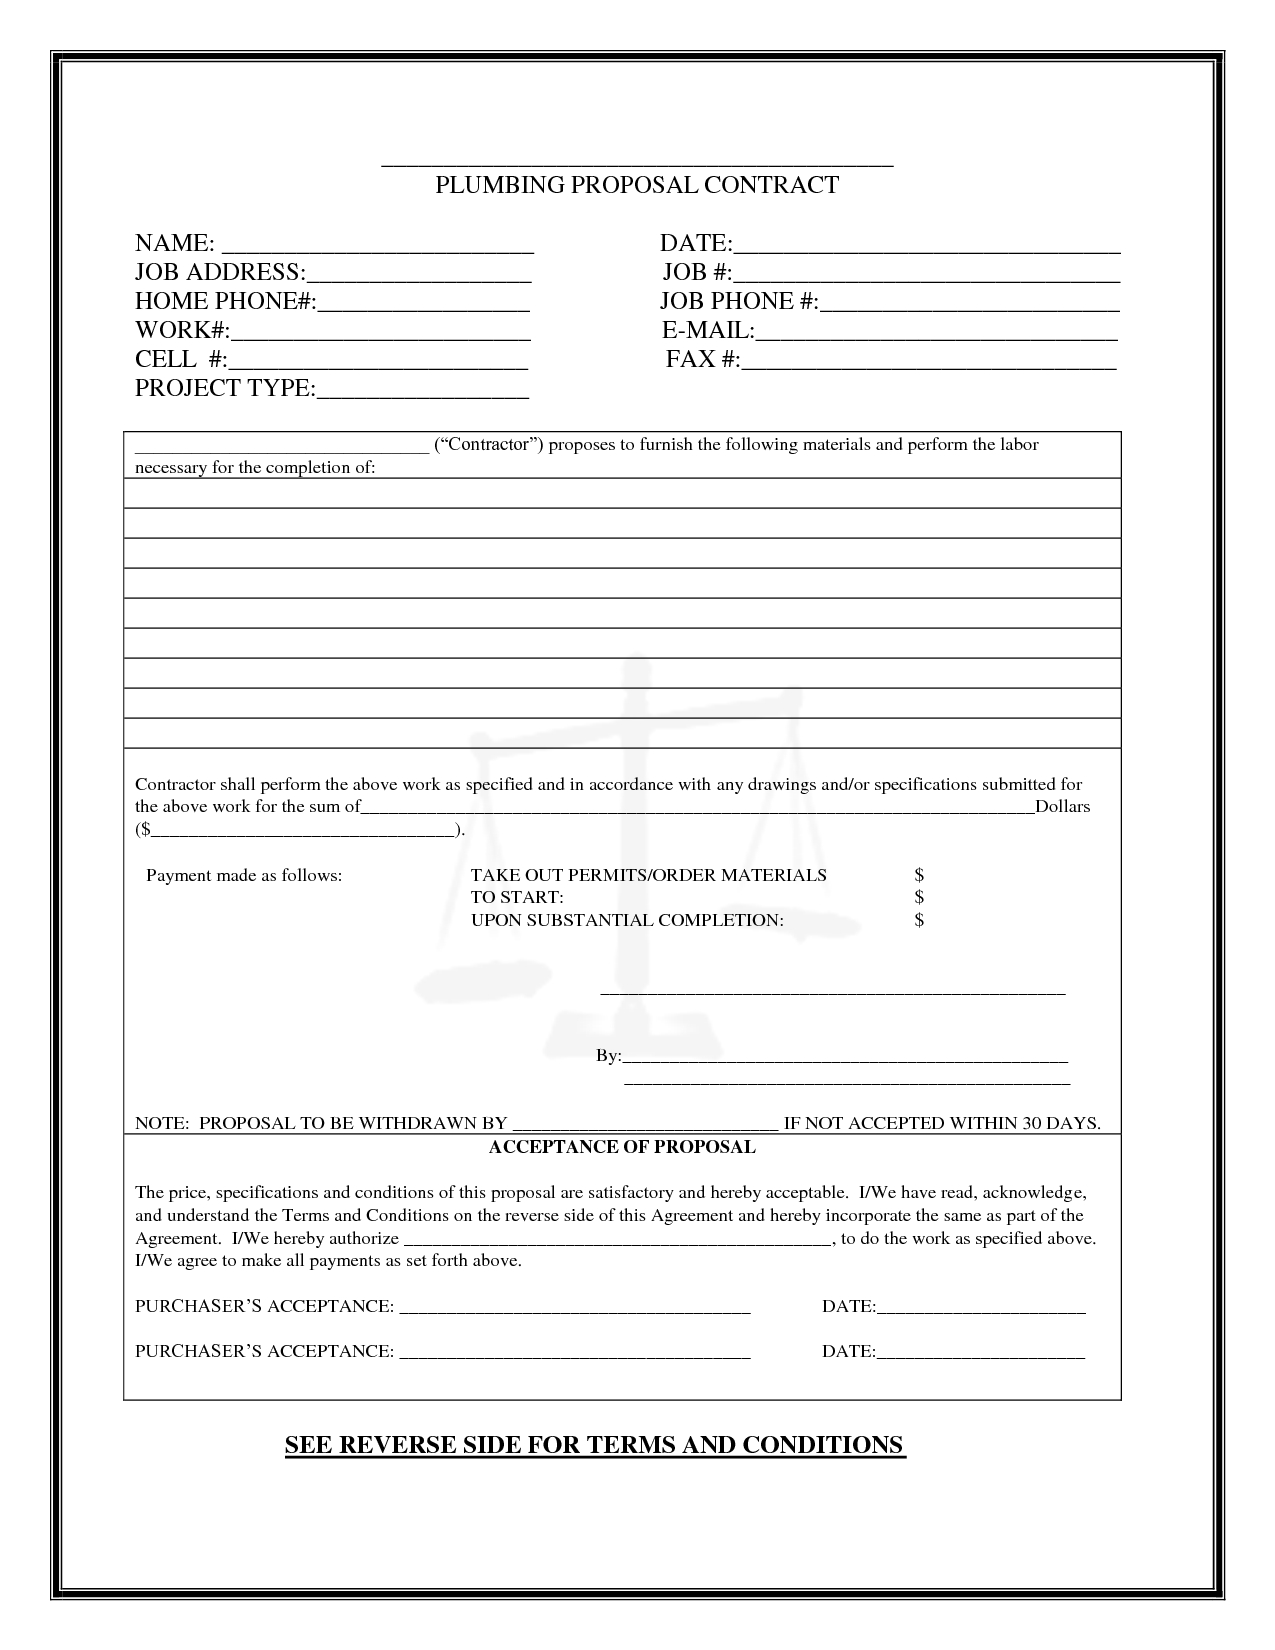 Pinboyvanss On Business | Proposal Templates, Templates - Free Printable Proposal Forms